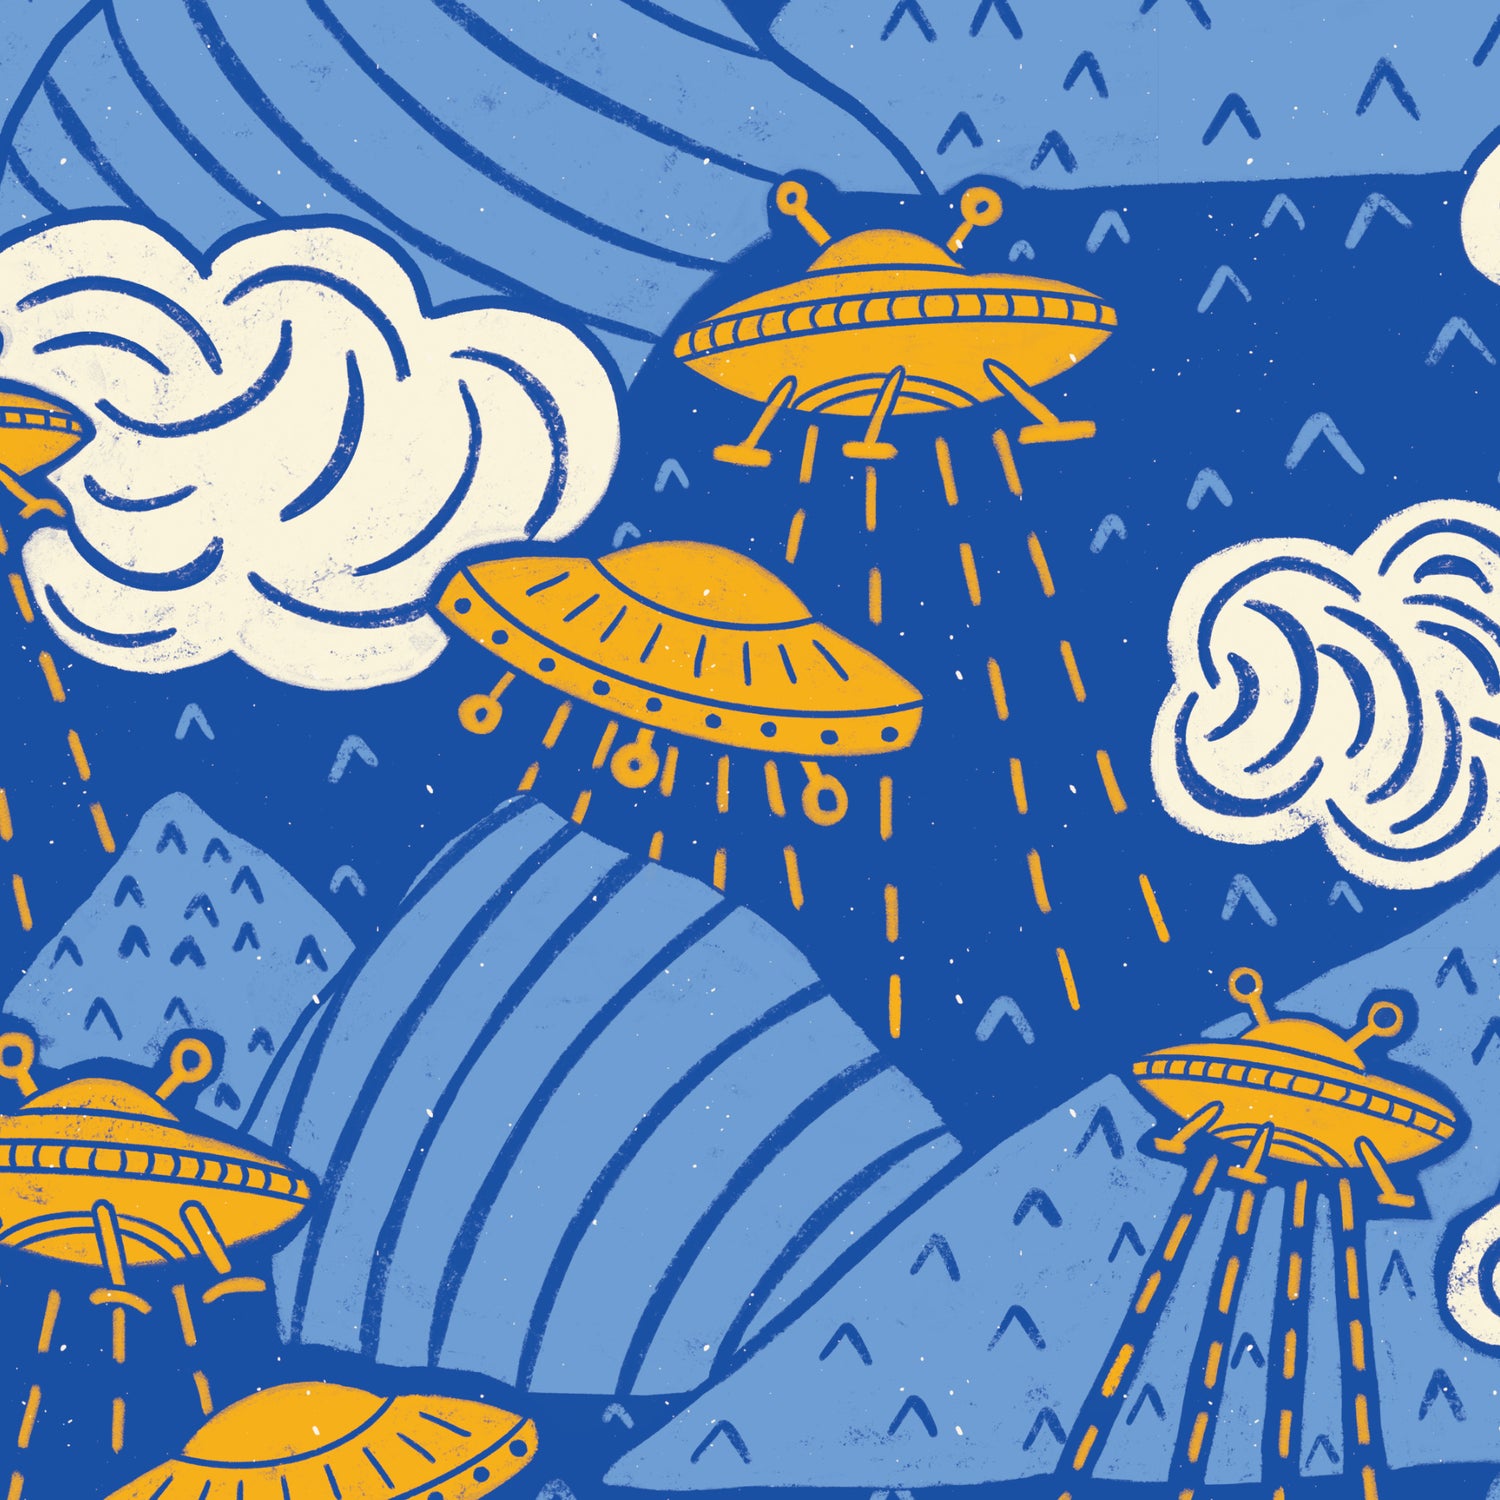 UFO Wallpaper in Blue shown in a close up view.